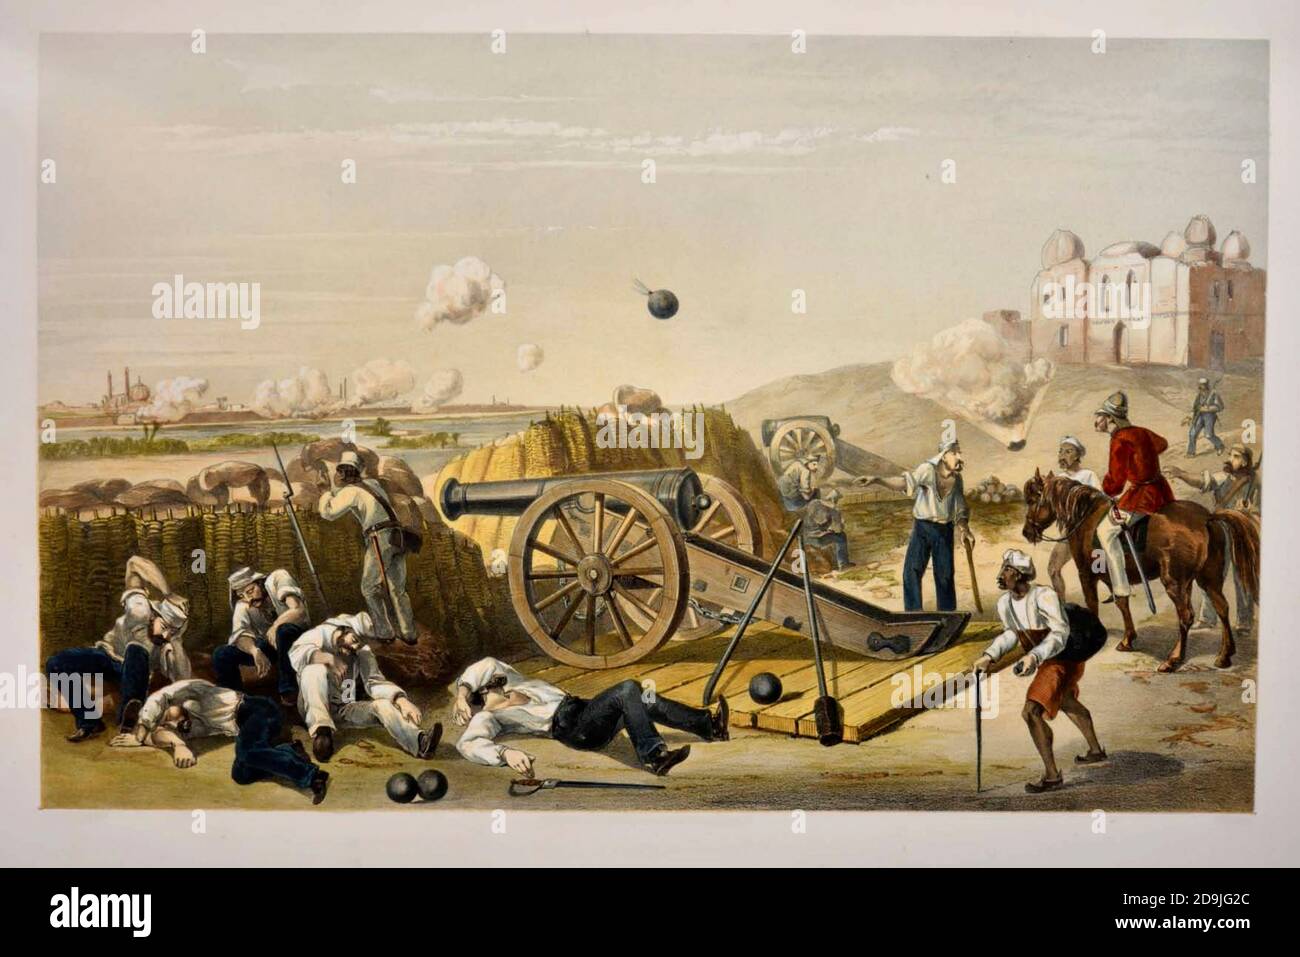 Heavy Day in the Batteries Lithographie aus dem Buch Campaign in India 1857-58 Illustrating the Military Operations before Delhi ; 26 handkolorierte lithographierte Platten. Von George Francklin Atkinson Published by Day & Son Lithographers to the Queen in 1859 Stockfoto